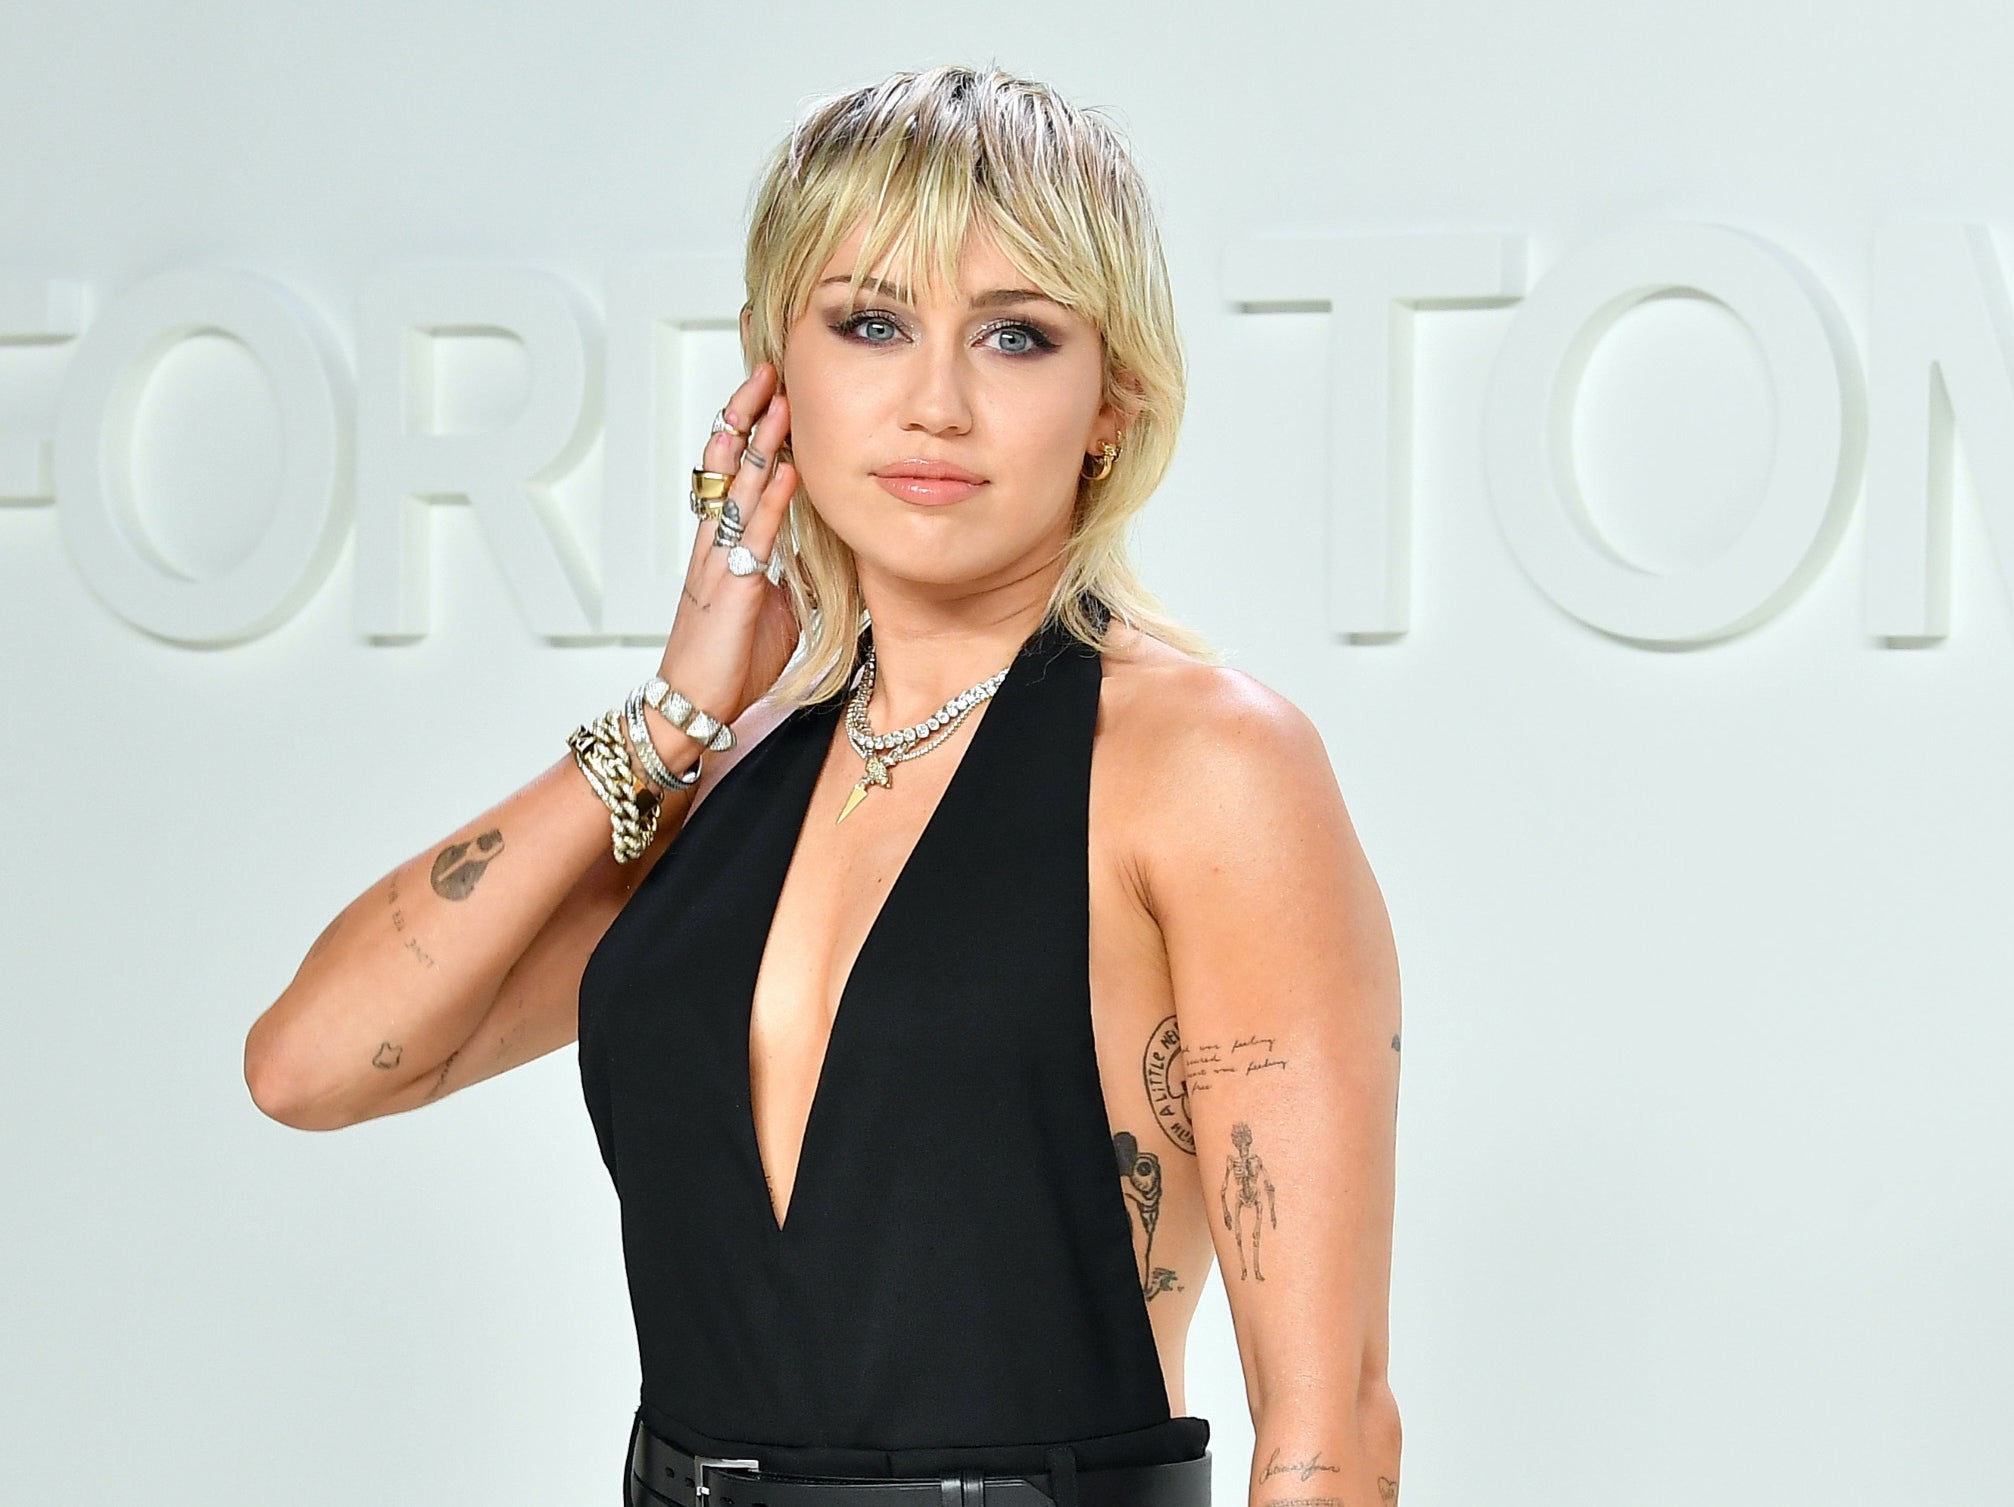 Miley Cyrus says she feels 'trauma' from intense scrutiny over her sexuality as a teenager - The Independent